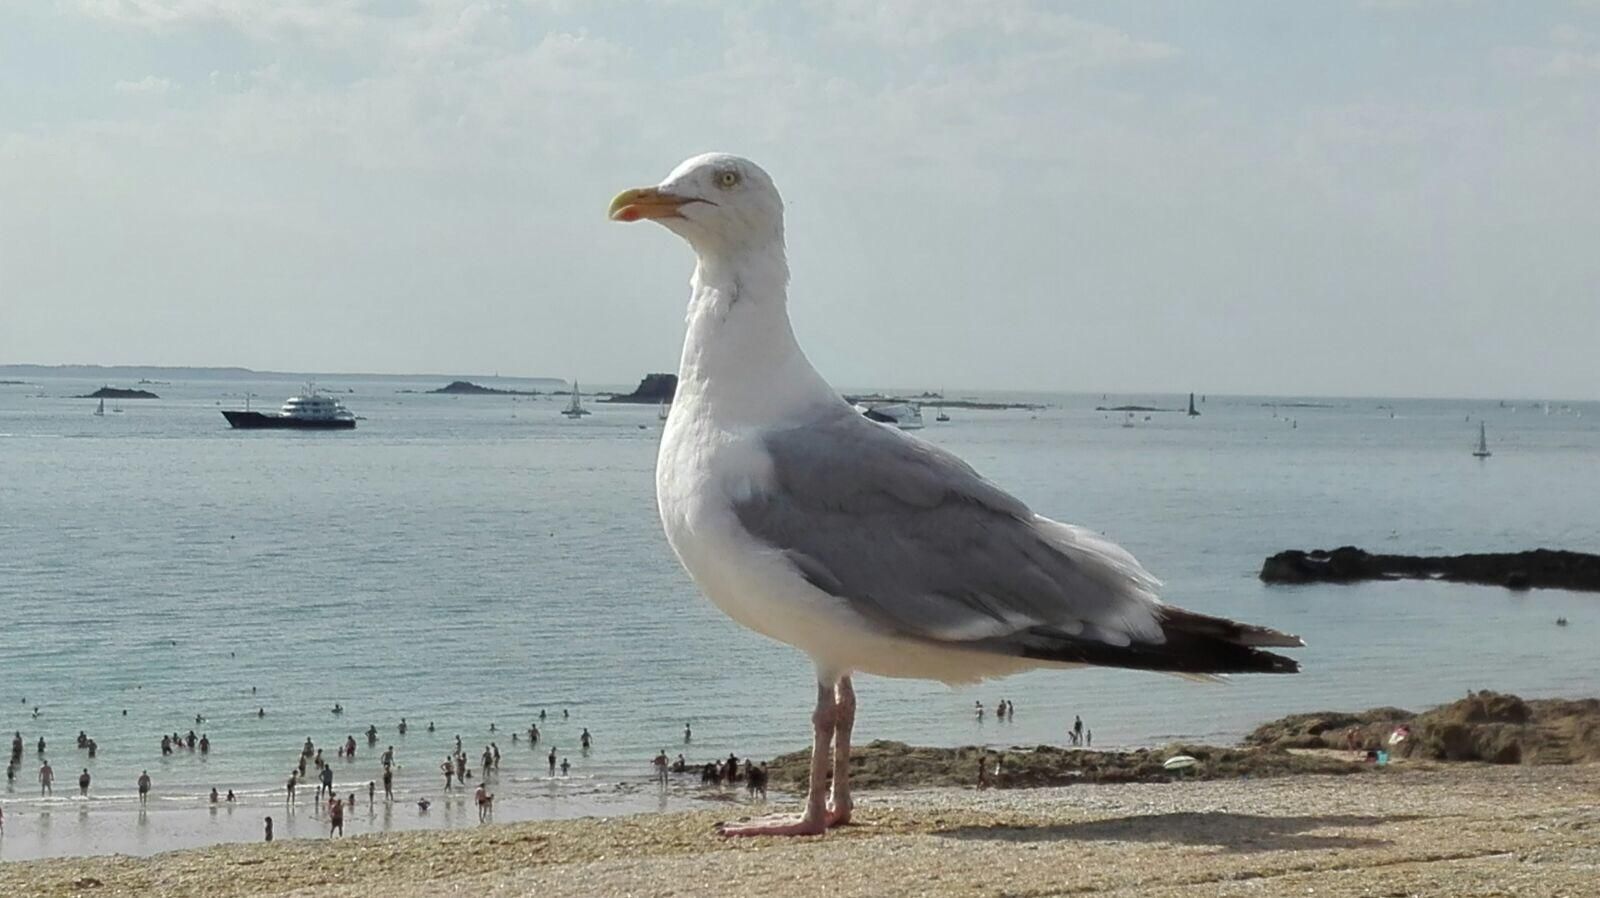 Giant Seagull attacks humans on beach in France